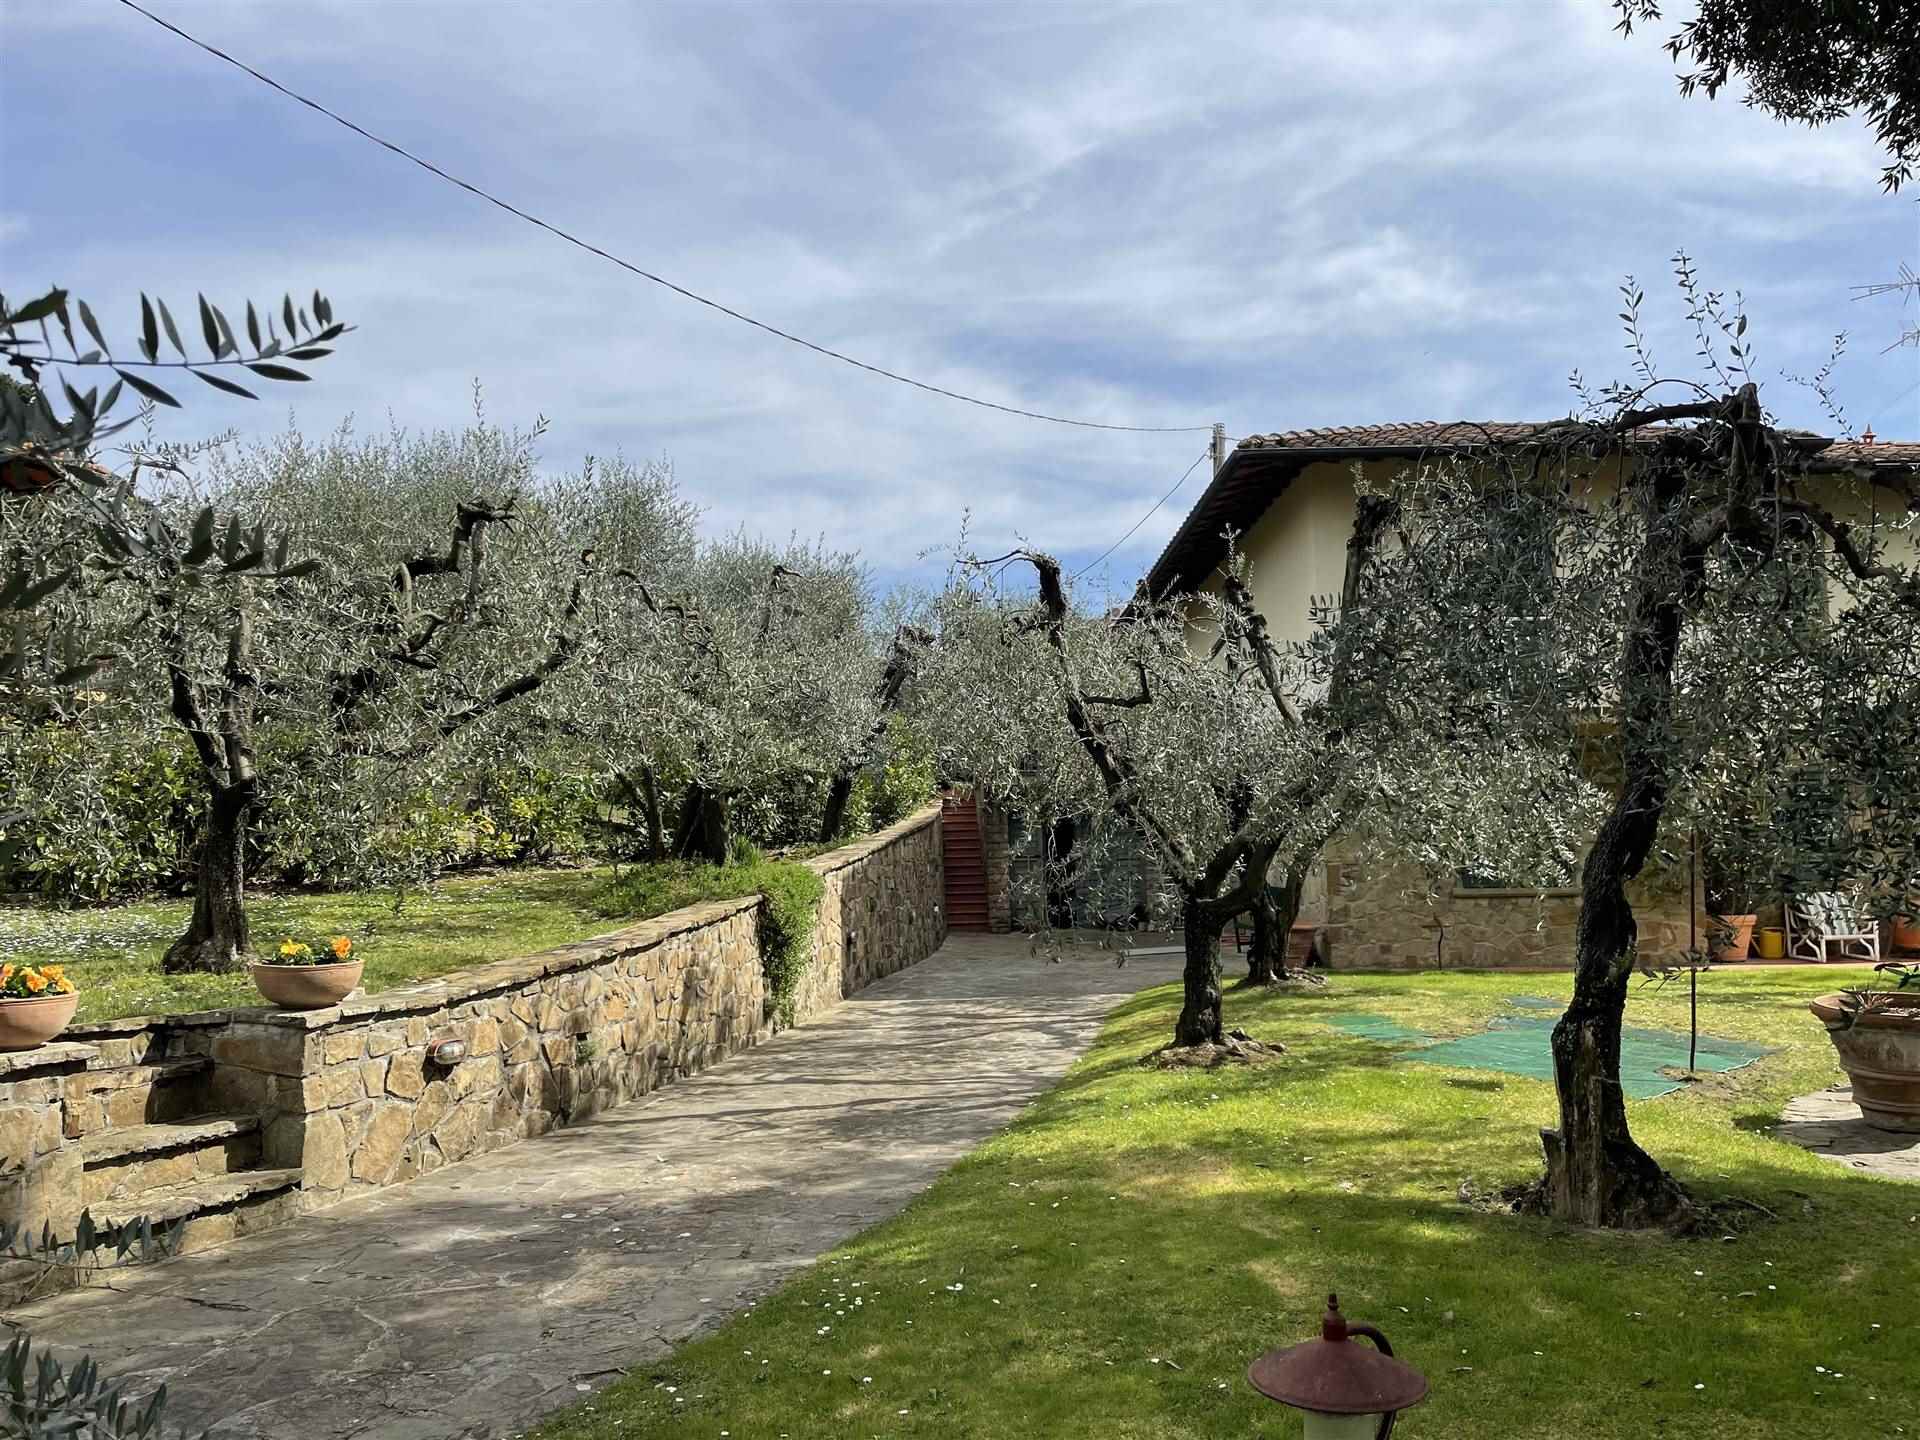 SAN CASCIANO IN VAL DI PESA, Villa for sale of 490 Sq. mt., Good condition, Heating Individual heating system, Energetic class: G, placed at Ground 